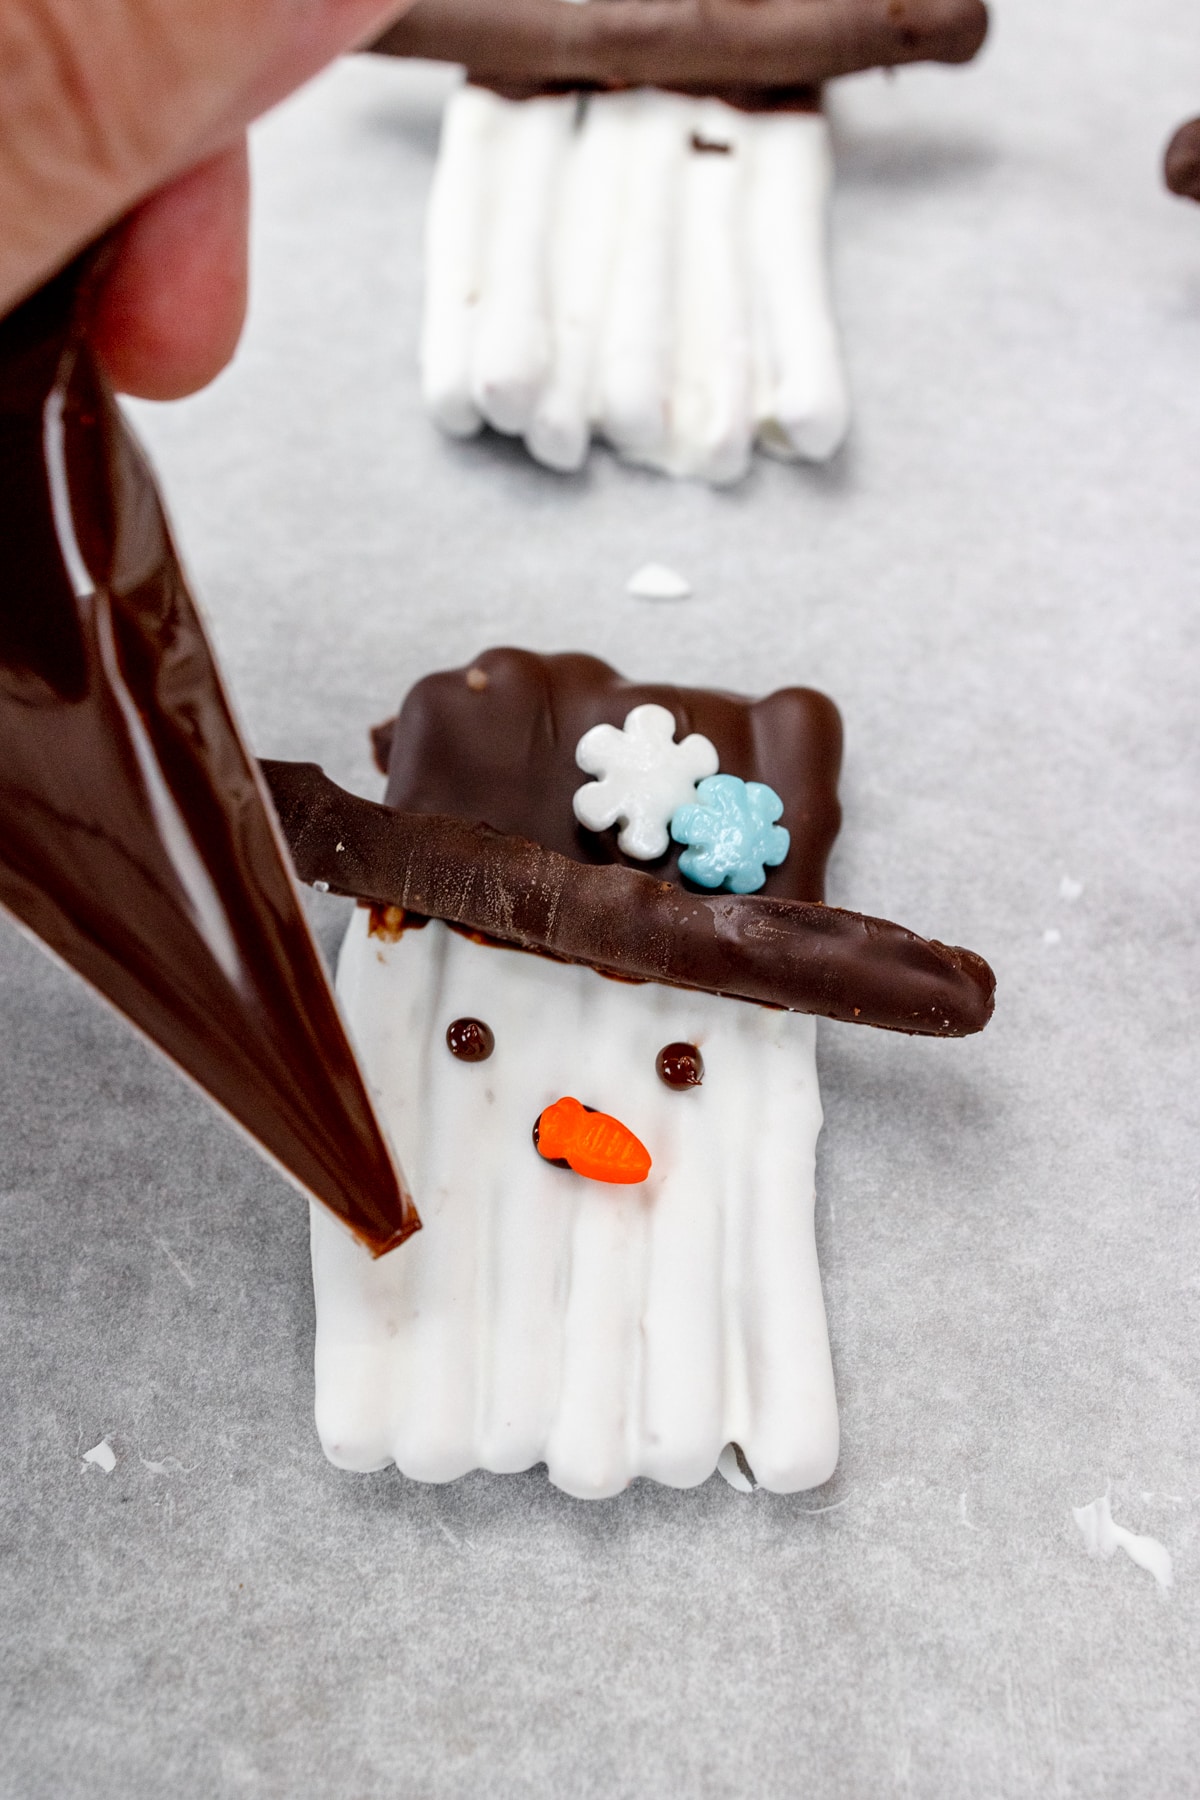 Close up of snowman's chocolate features being piped onto it.